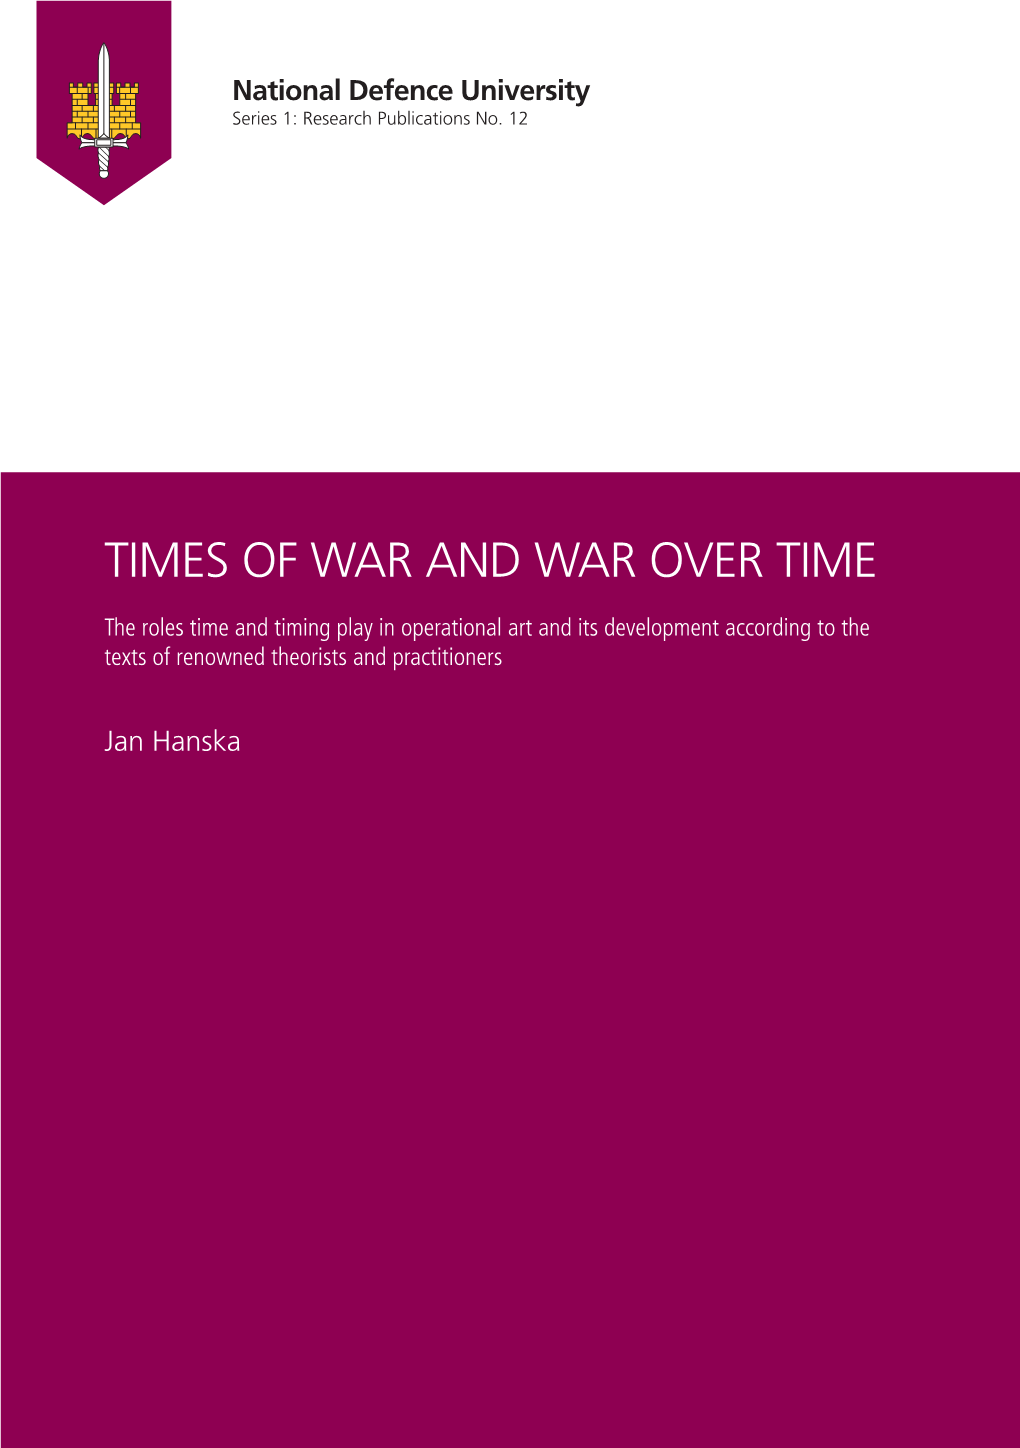 Times of War and War Over Time